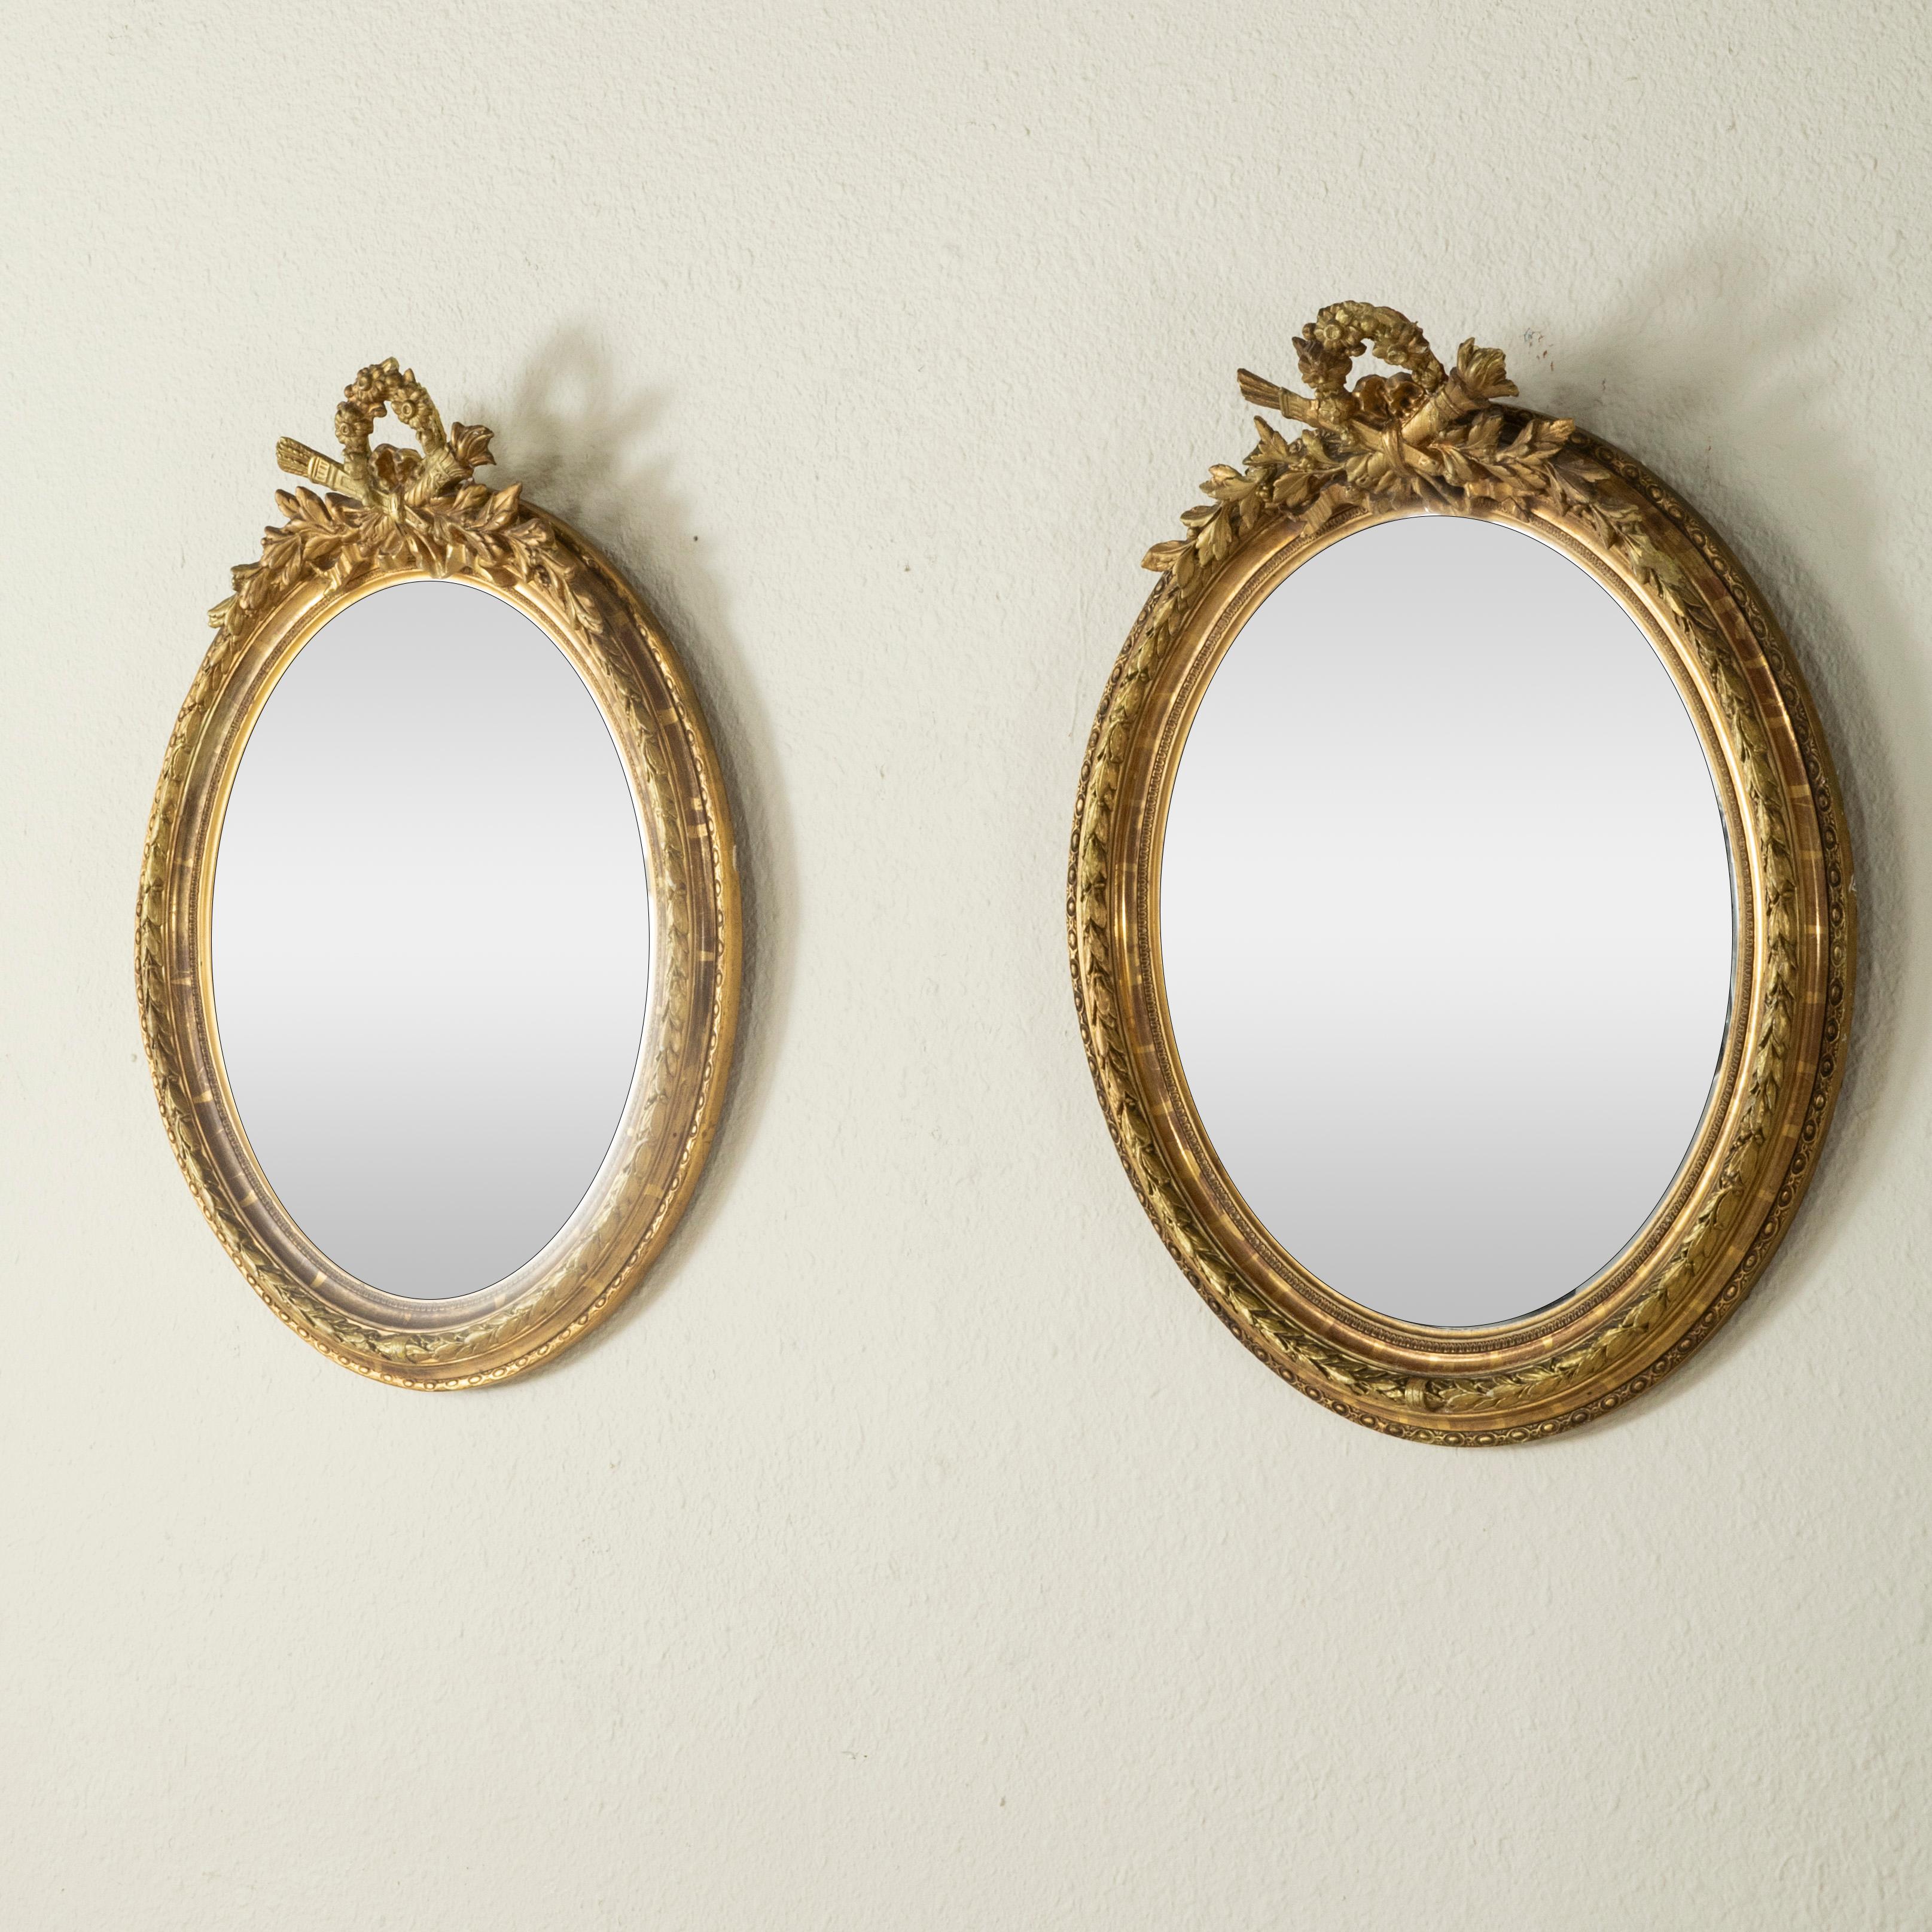 This pair of late nineteenth century small scale oval Louis XVI style gilt wood mirrors features a crown of flowers and a classic crossed torch and quiver at the top. Each frame is detailed with beading, rais-de-coeur, and a laurel pattern. The